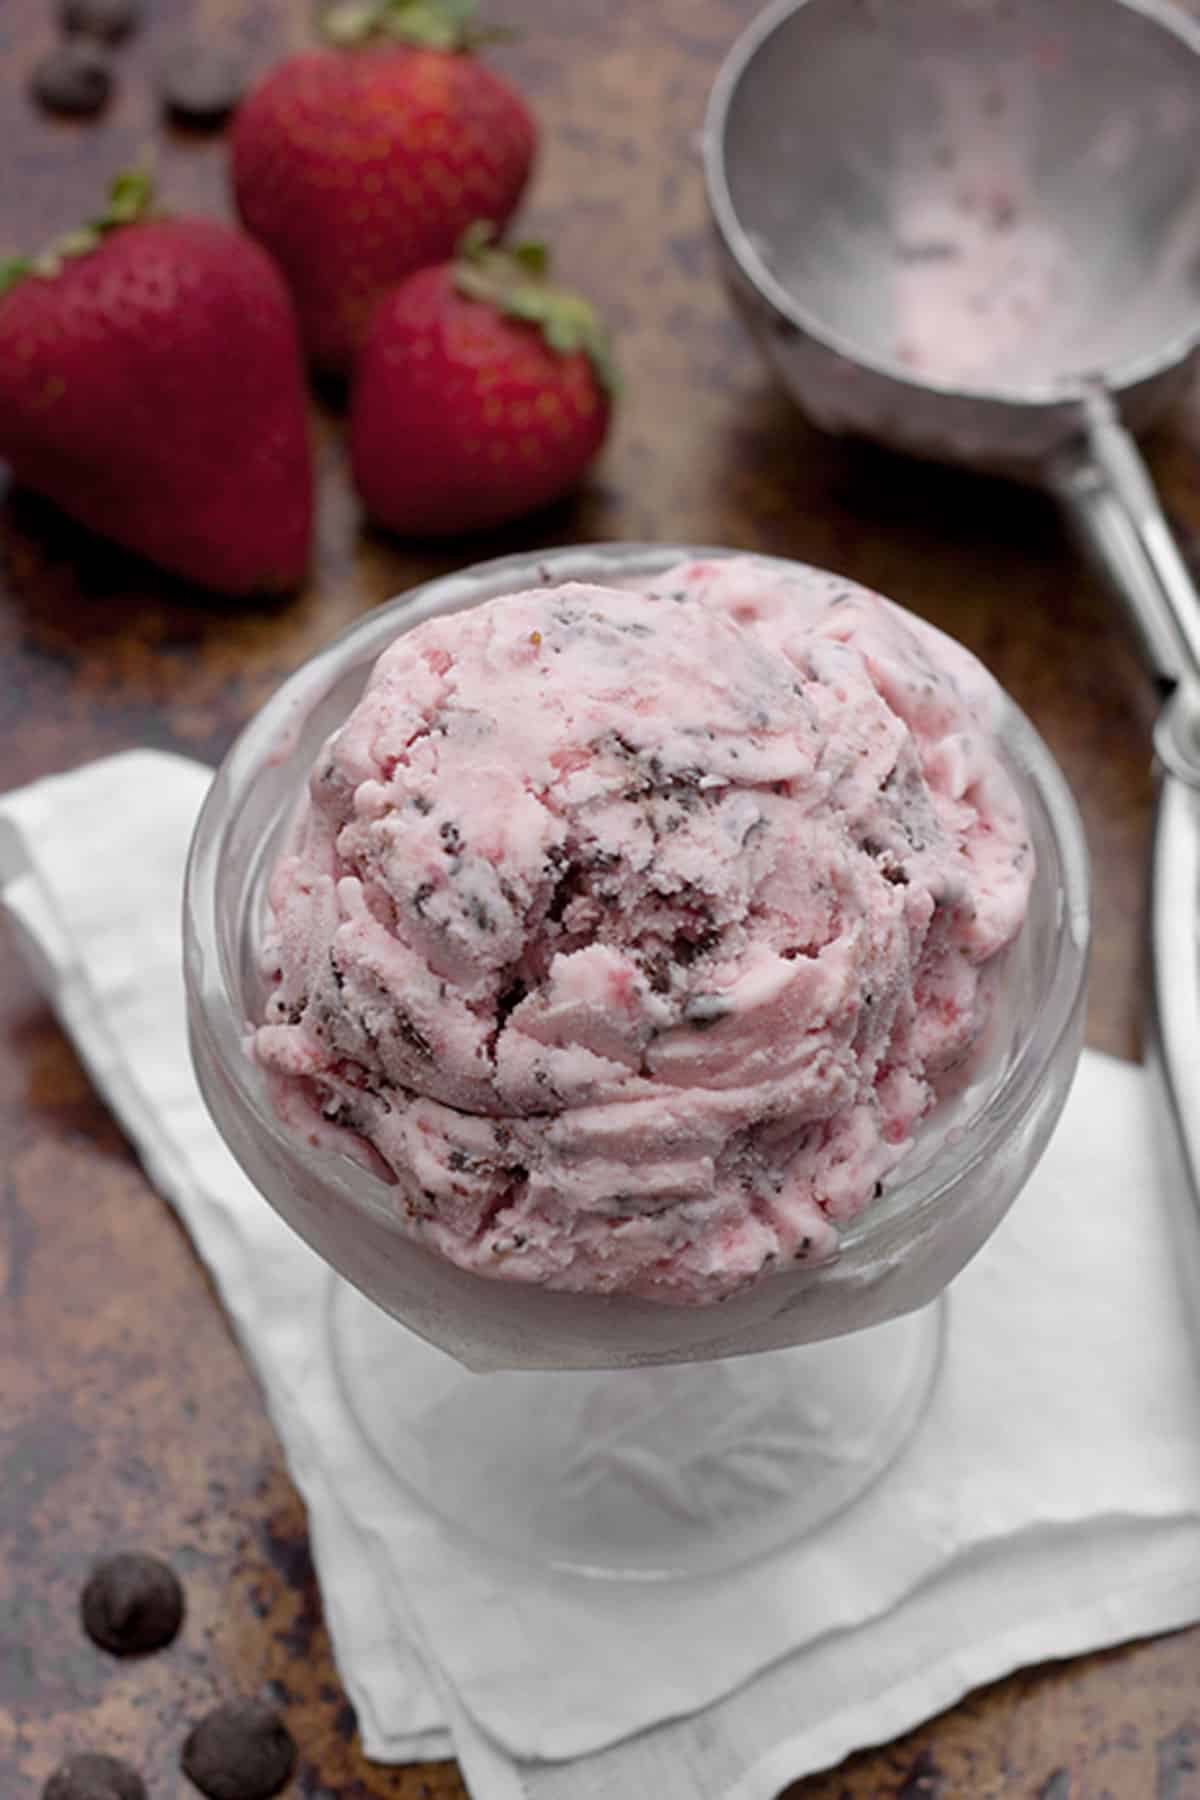 chocolate covered strawberry ice cream in ice cream bowl with scoop